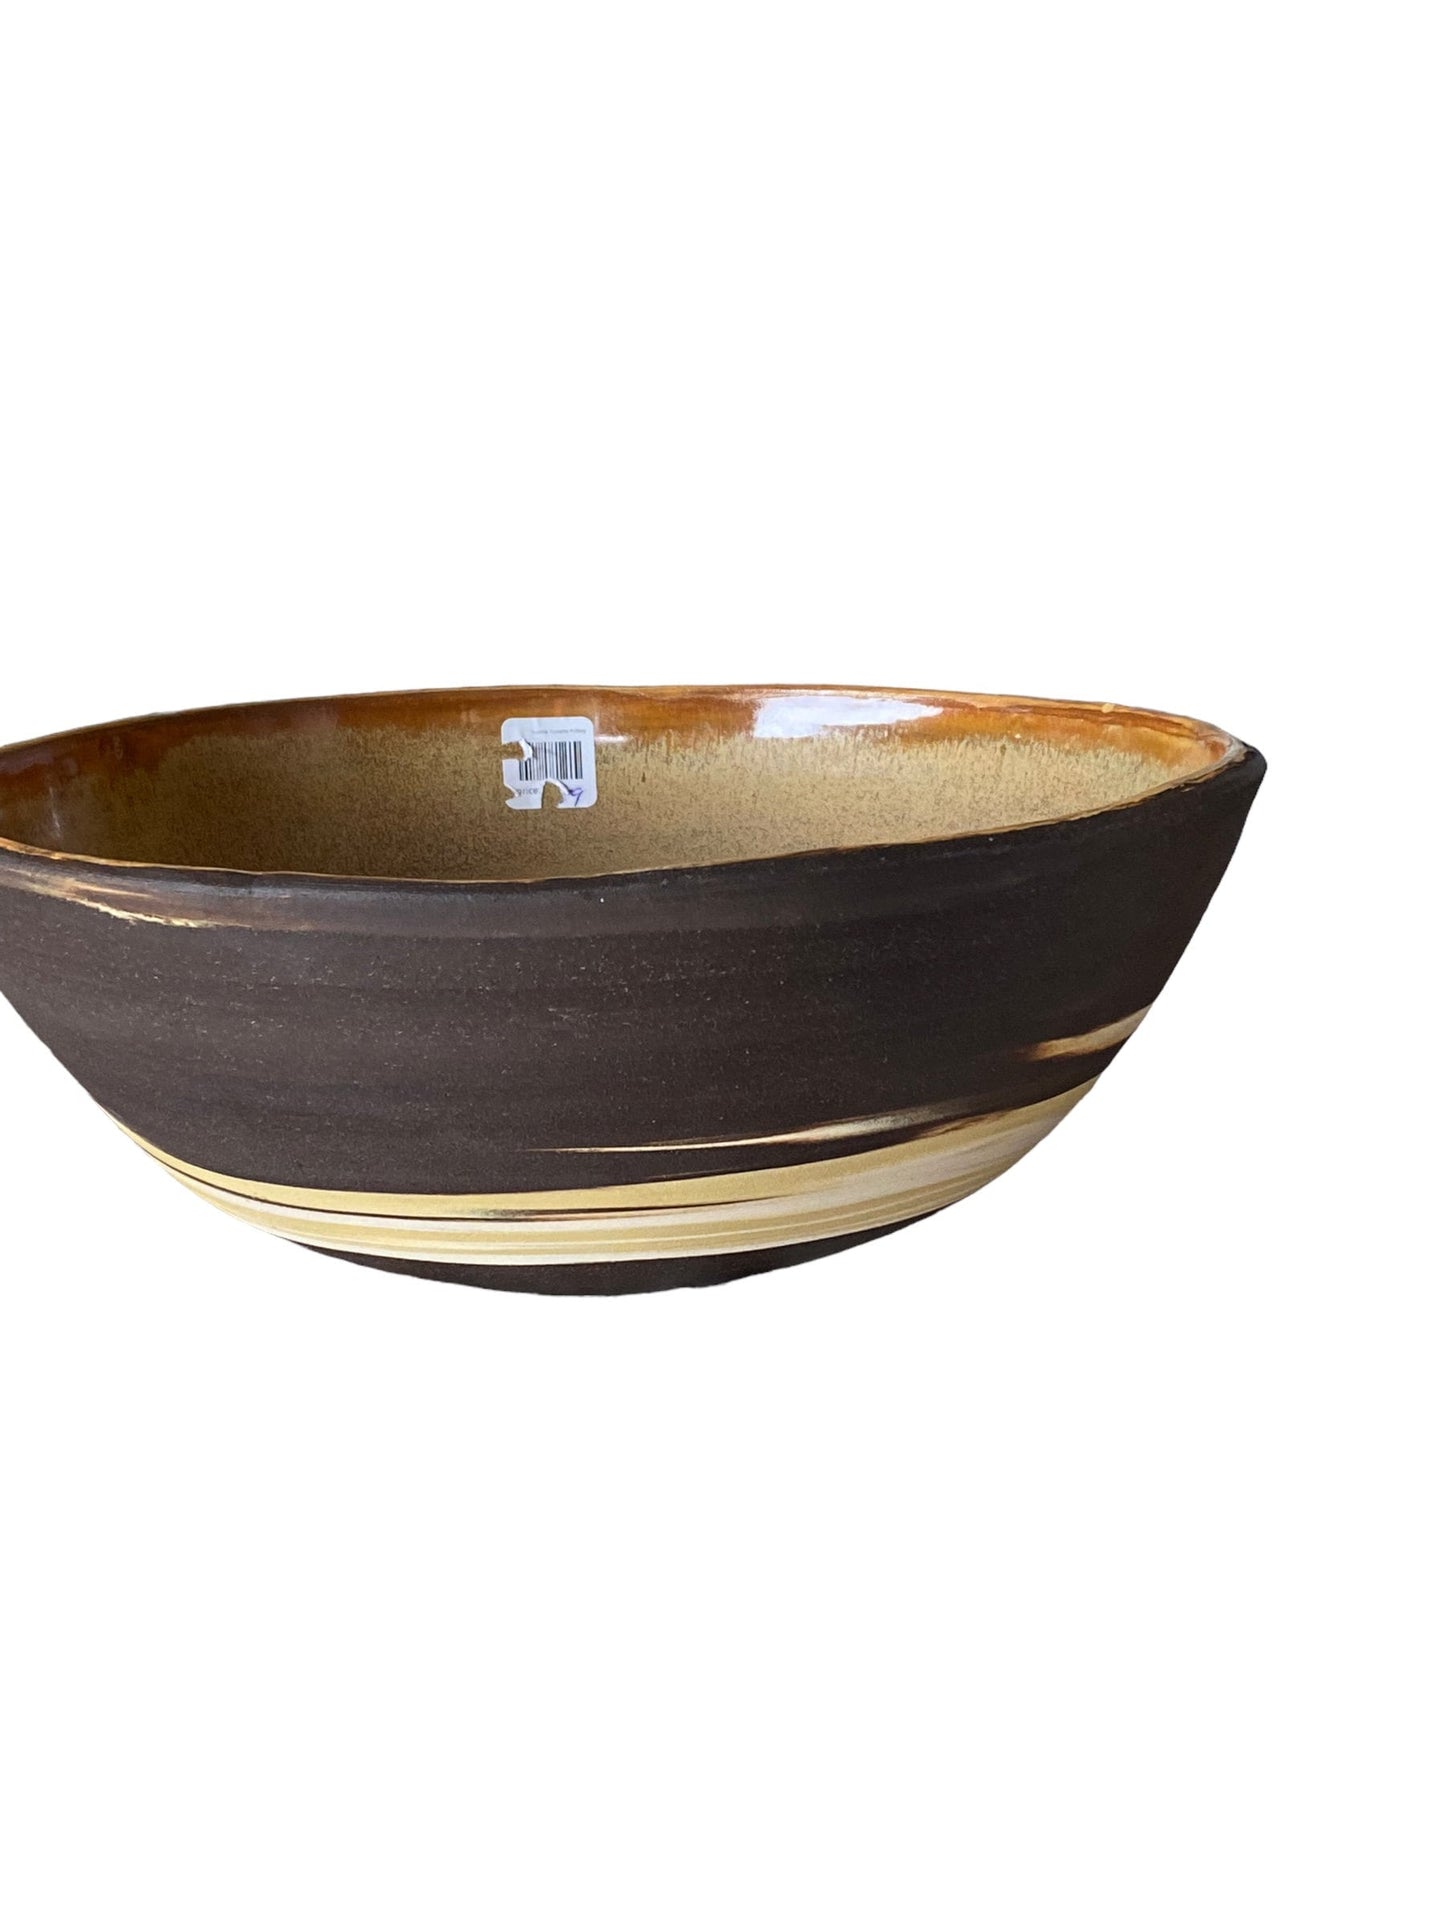 Black and Gold Agateware Clay Large Serving Pottery Bowl: Elegant Centerpiece for Stylish Entertaining